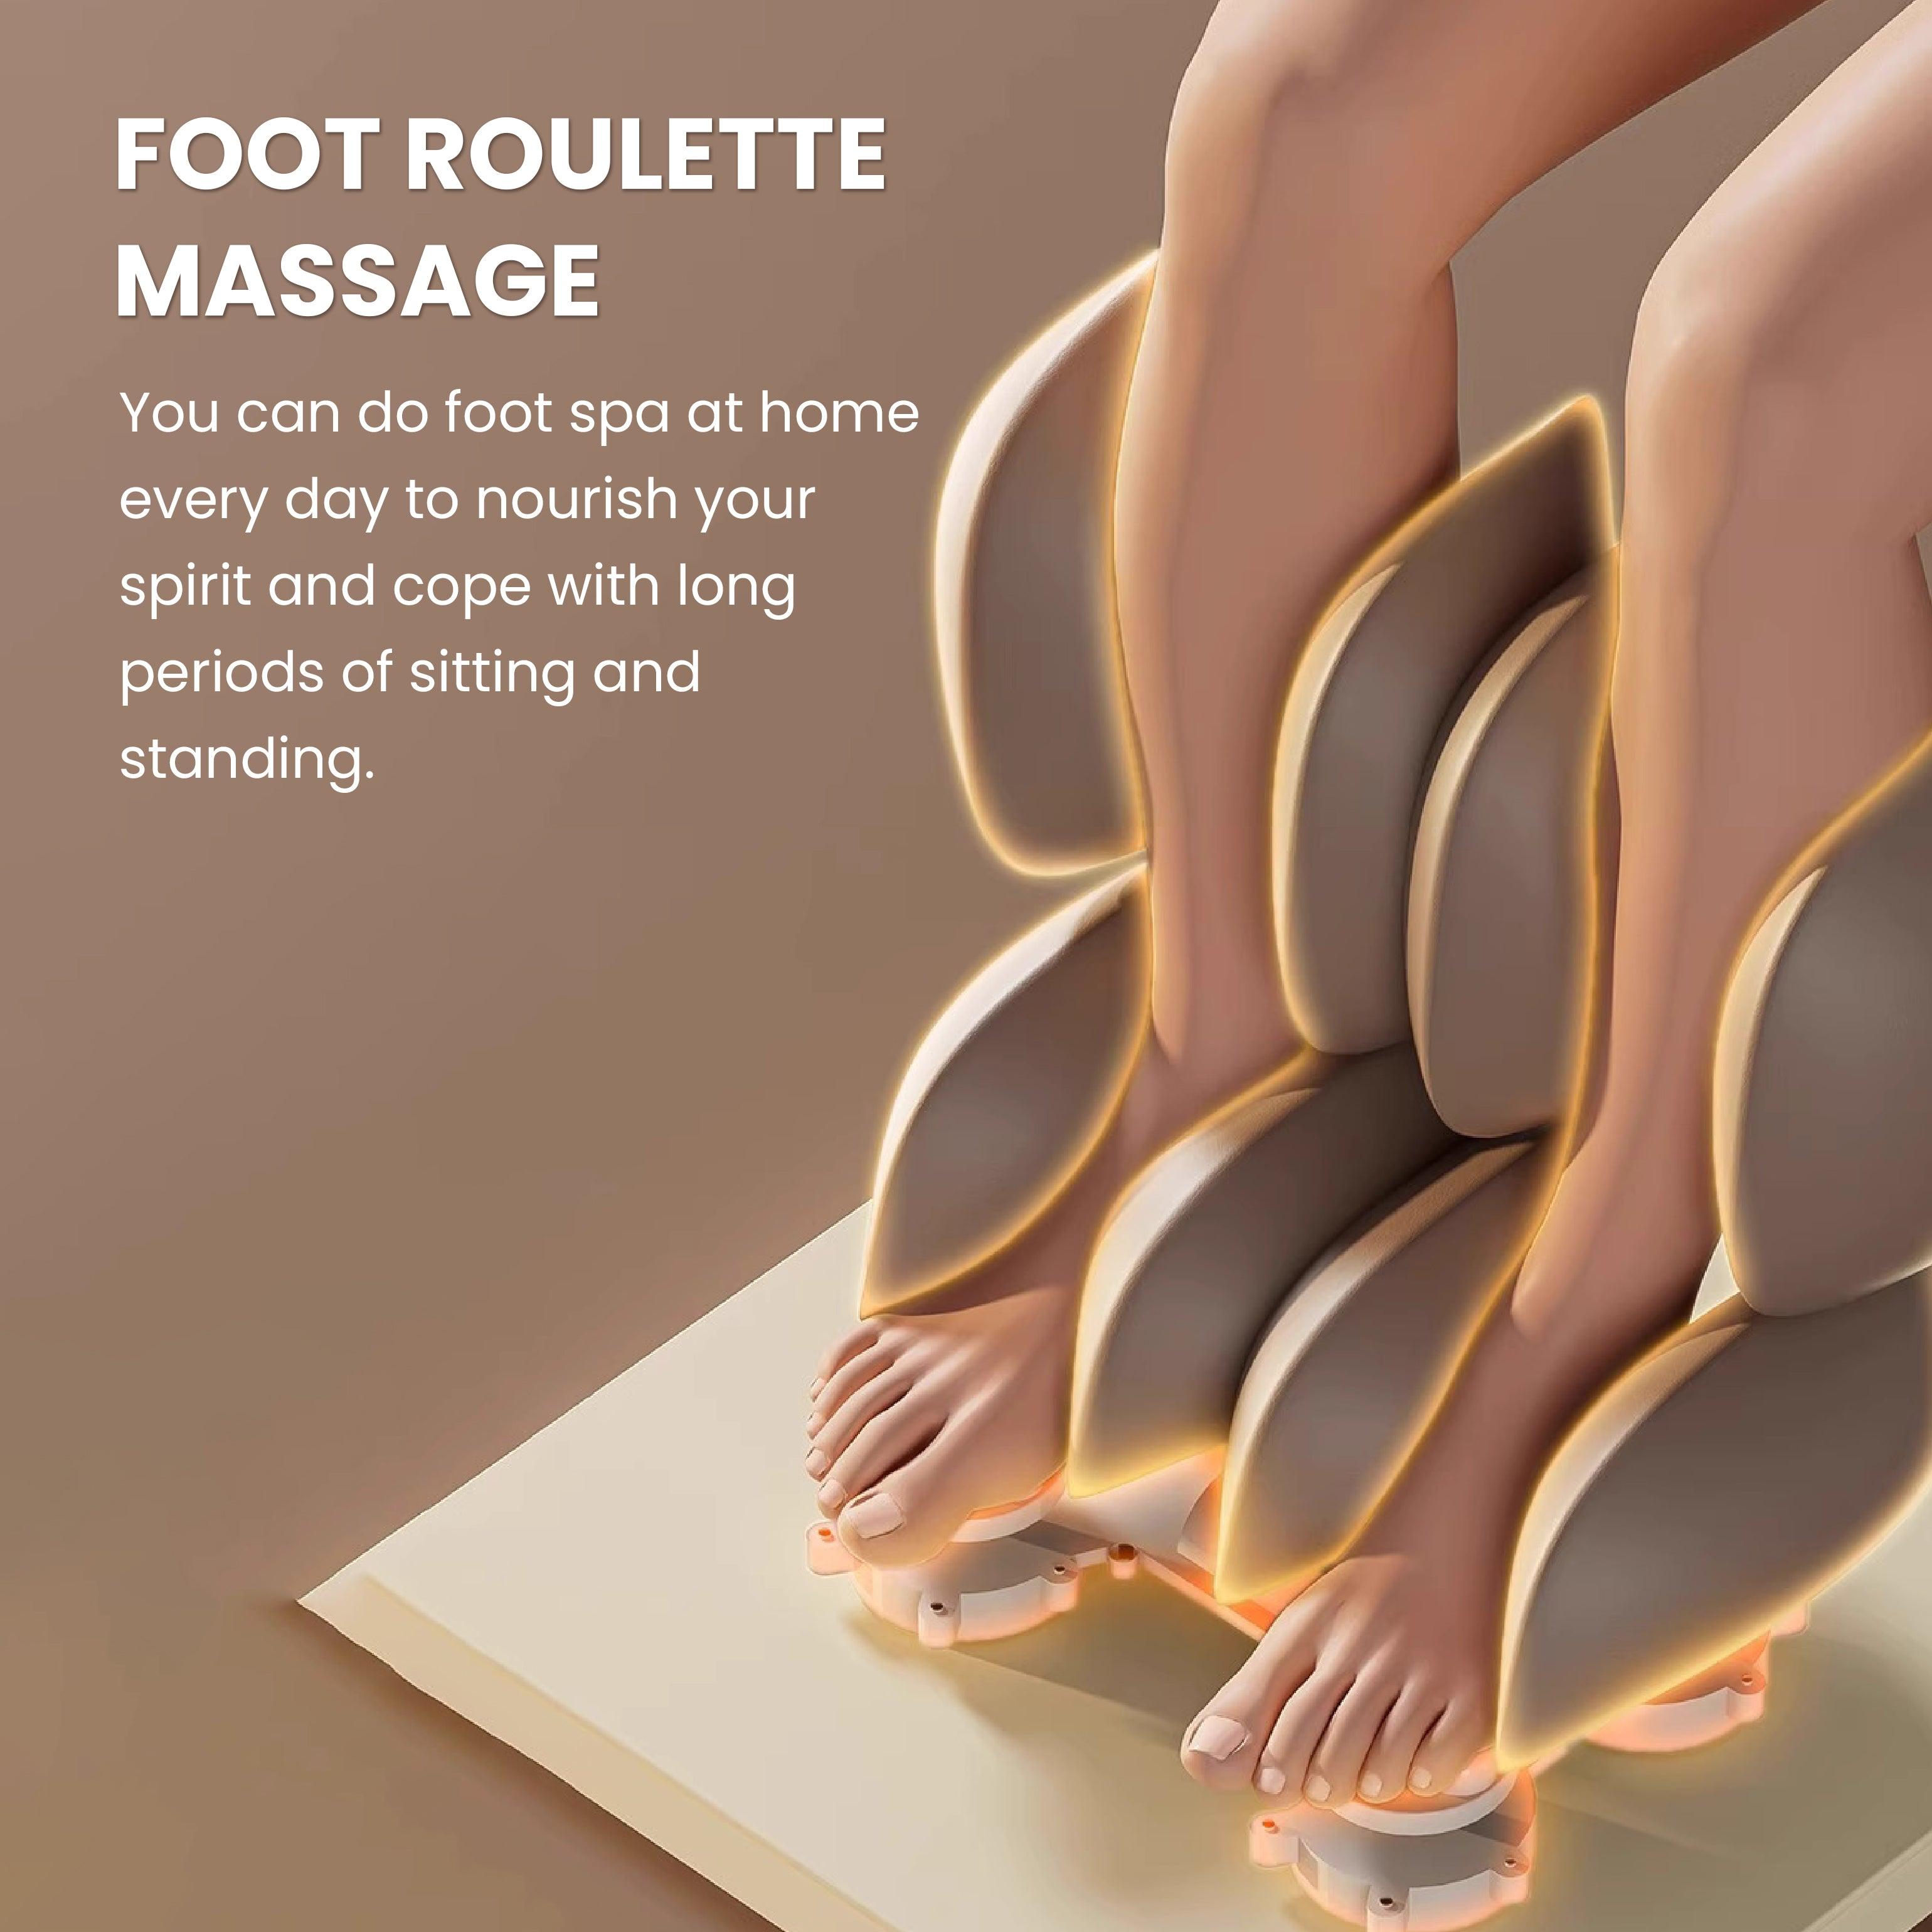 Foot roulette massage feature of Royal Magestic Pro Massage Chair demonstrating foot spa treatment for relaxation and stress relief